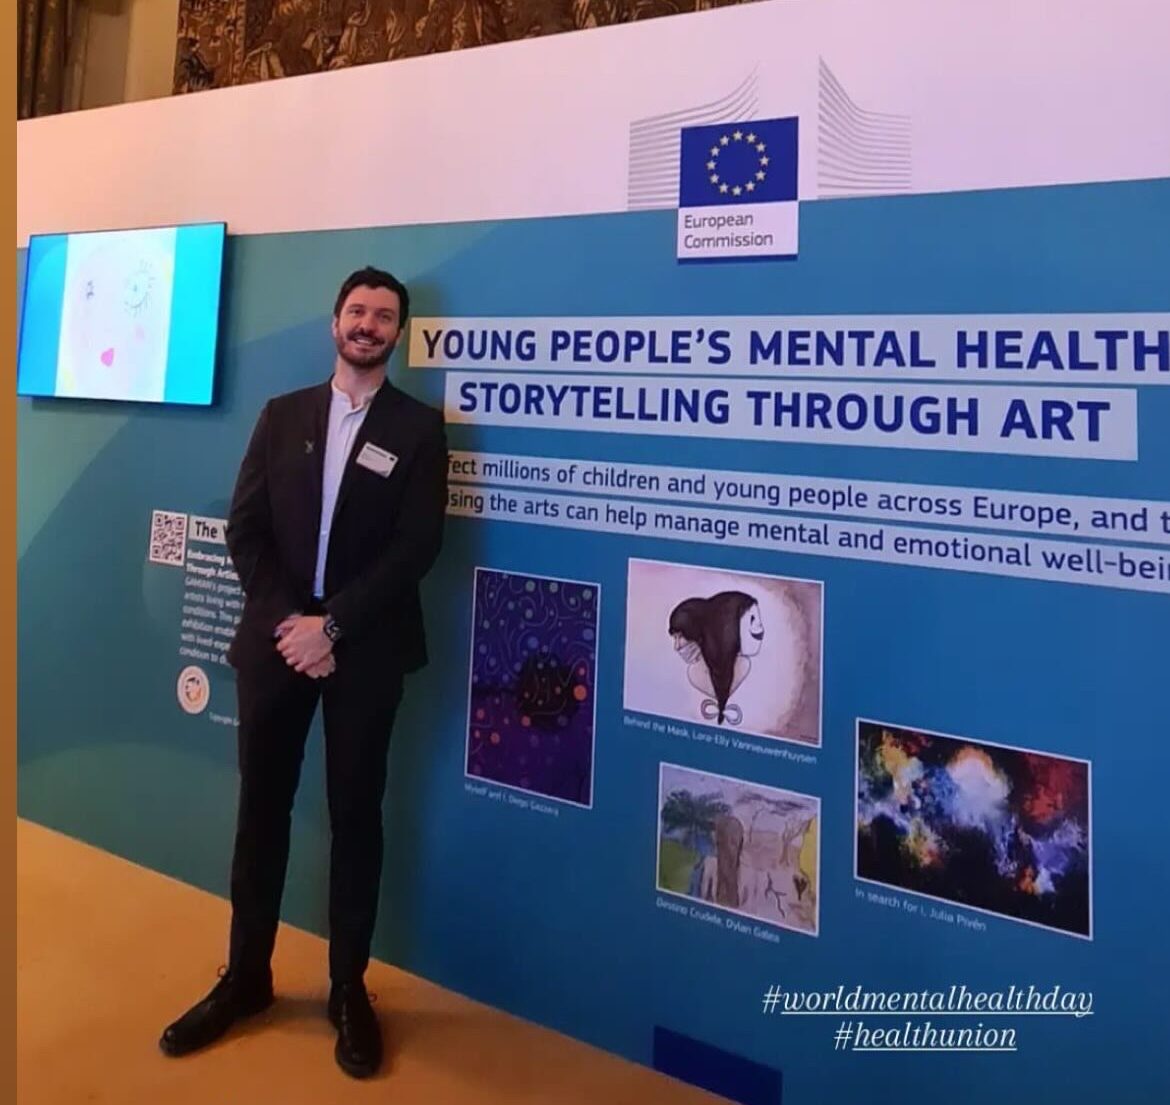 HighLevel Conference on Mental Health Hosted in Brussels on World